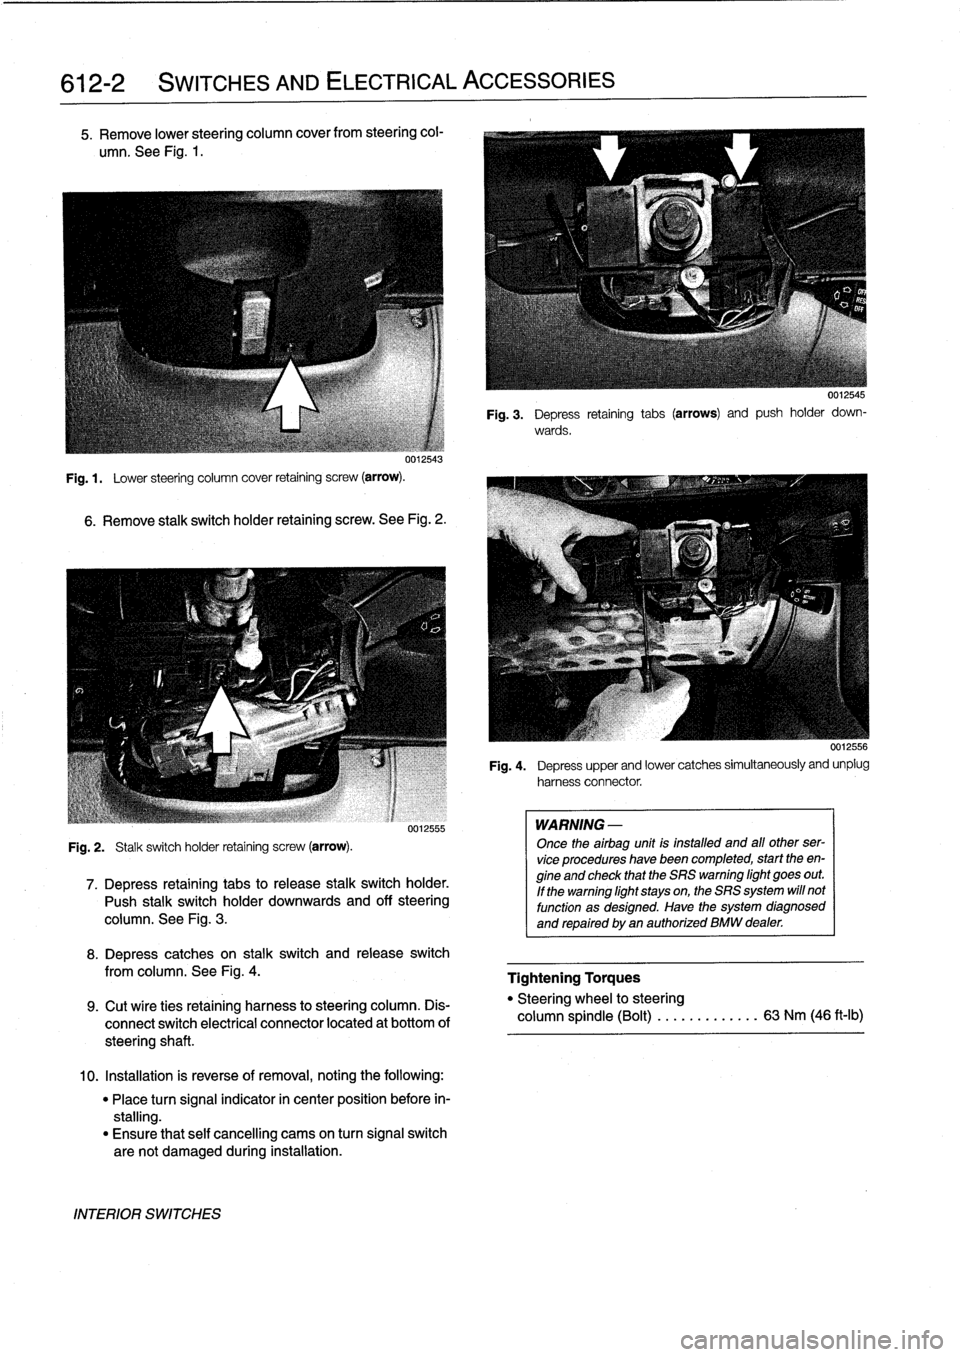 BMW 318i 1997 E36 Service Manual 
612-2

	

SWITCHES
AND
ELECTRICAL
ACCESSORIES

5
.
Remove
lower
steering
column
cover
from
steering
col-

umn
.
See
Fig
.
1
.

uu12543

Fig
.
1
.

	

Lower
steering
column
cover
retaining
screw
(arro